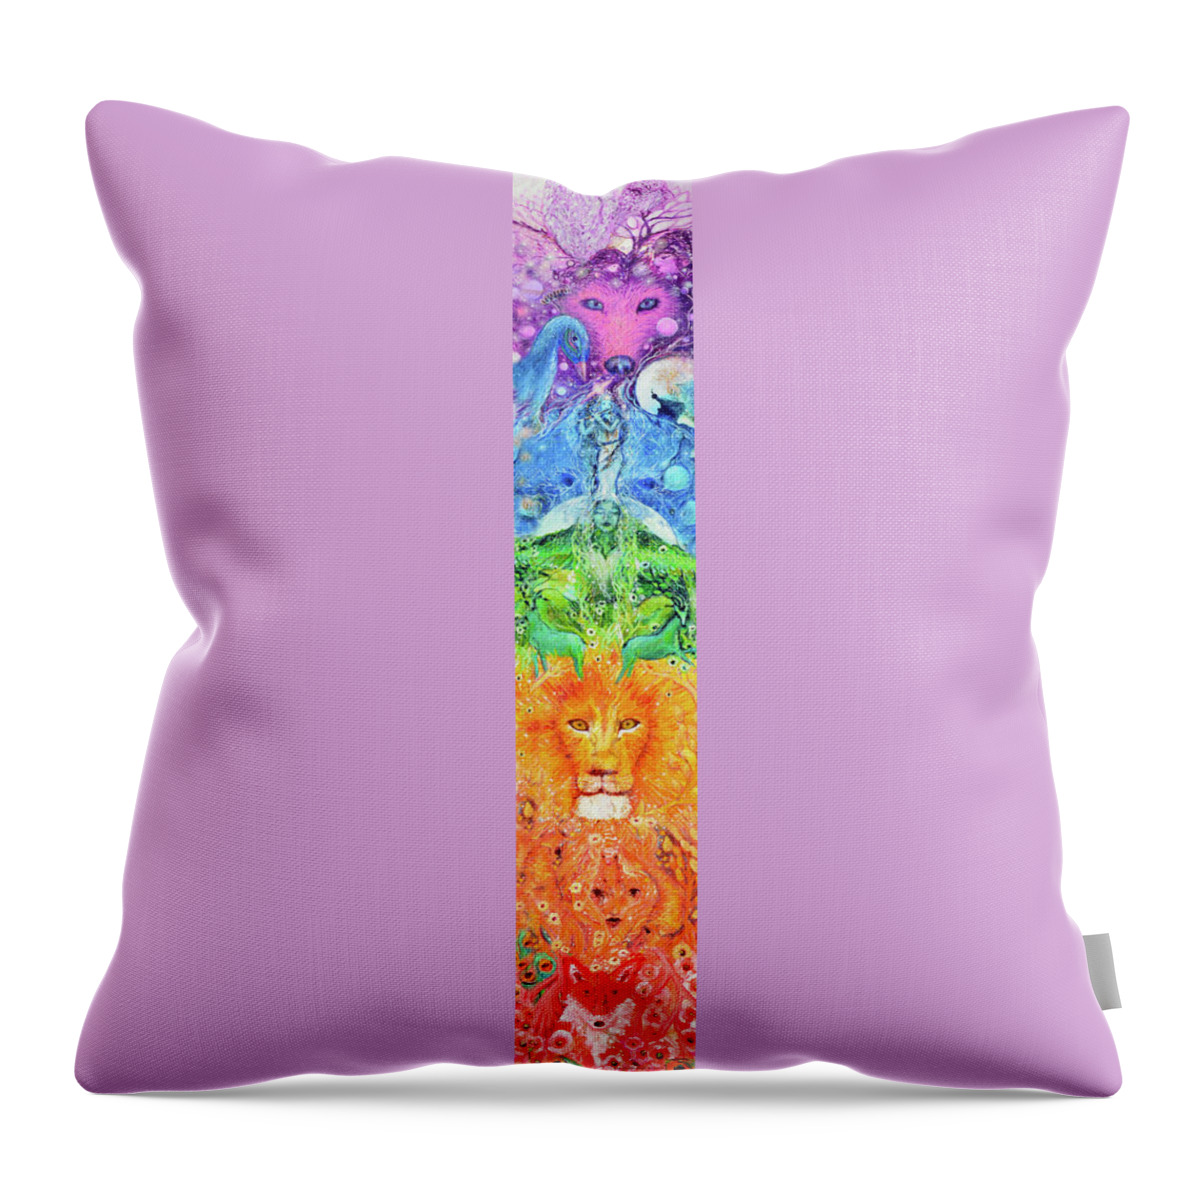 Spirit Companions Throw Pillow featuring the painting Chakra Totem Rainbow Dreams by Ashleigh Dyan Bayer